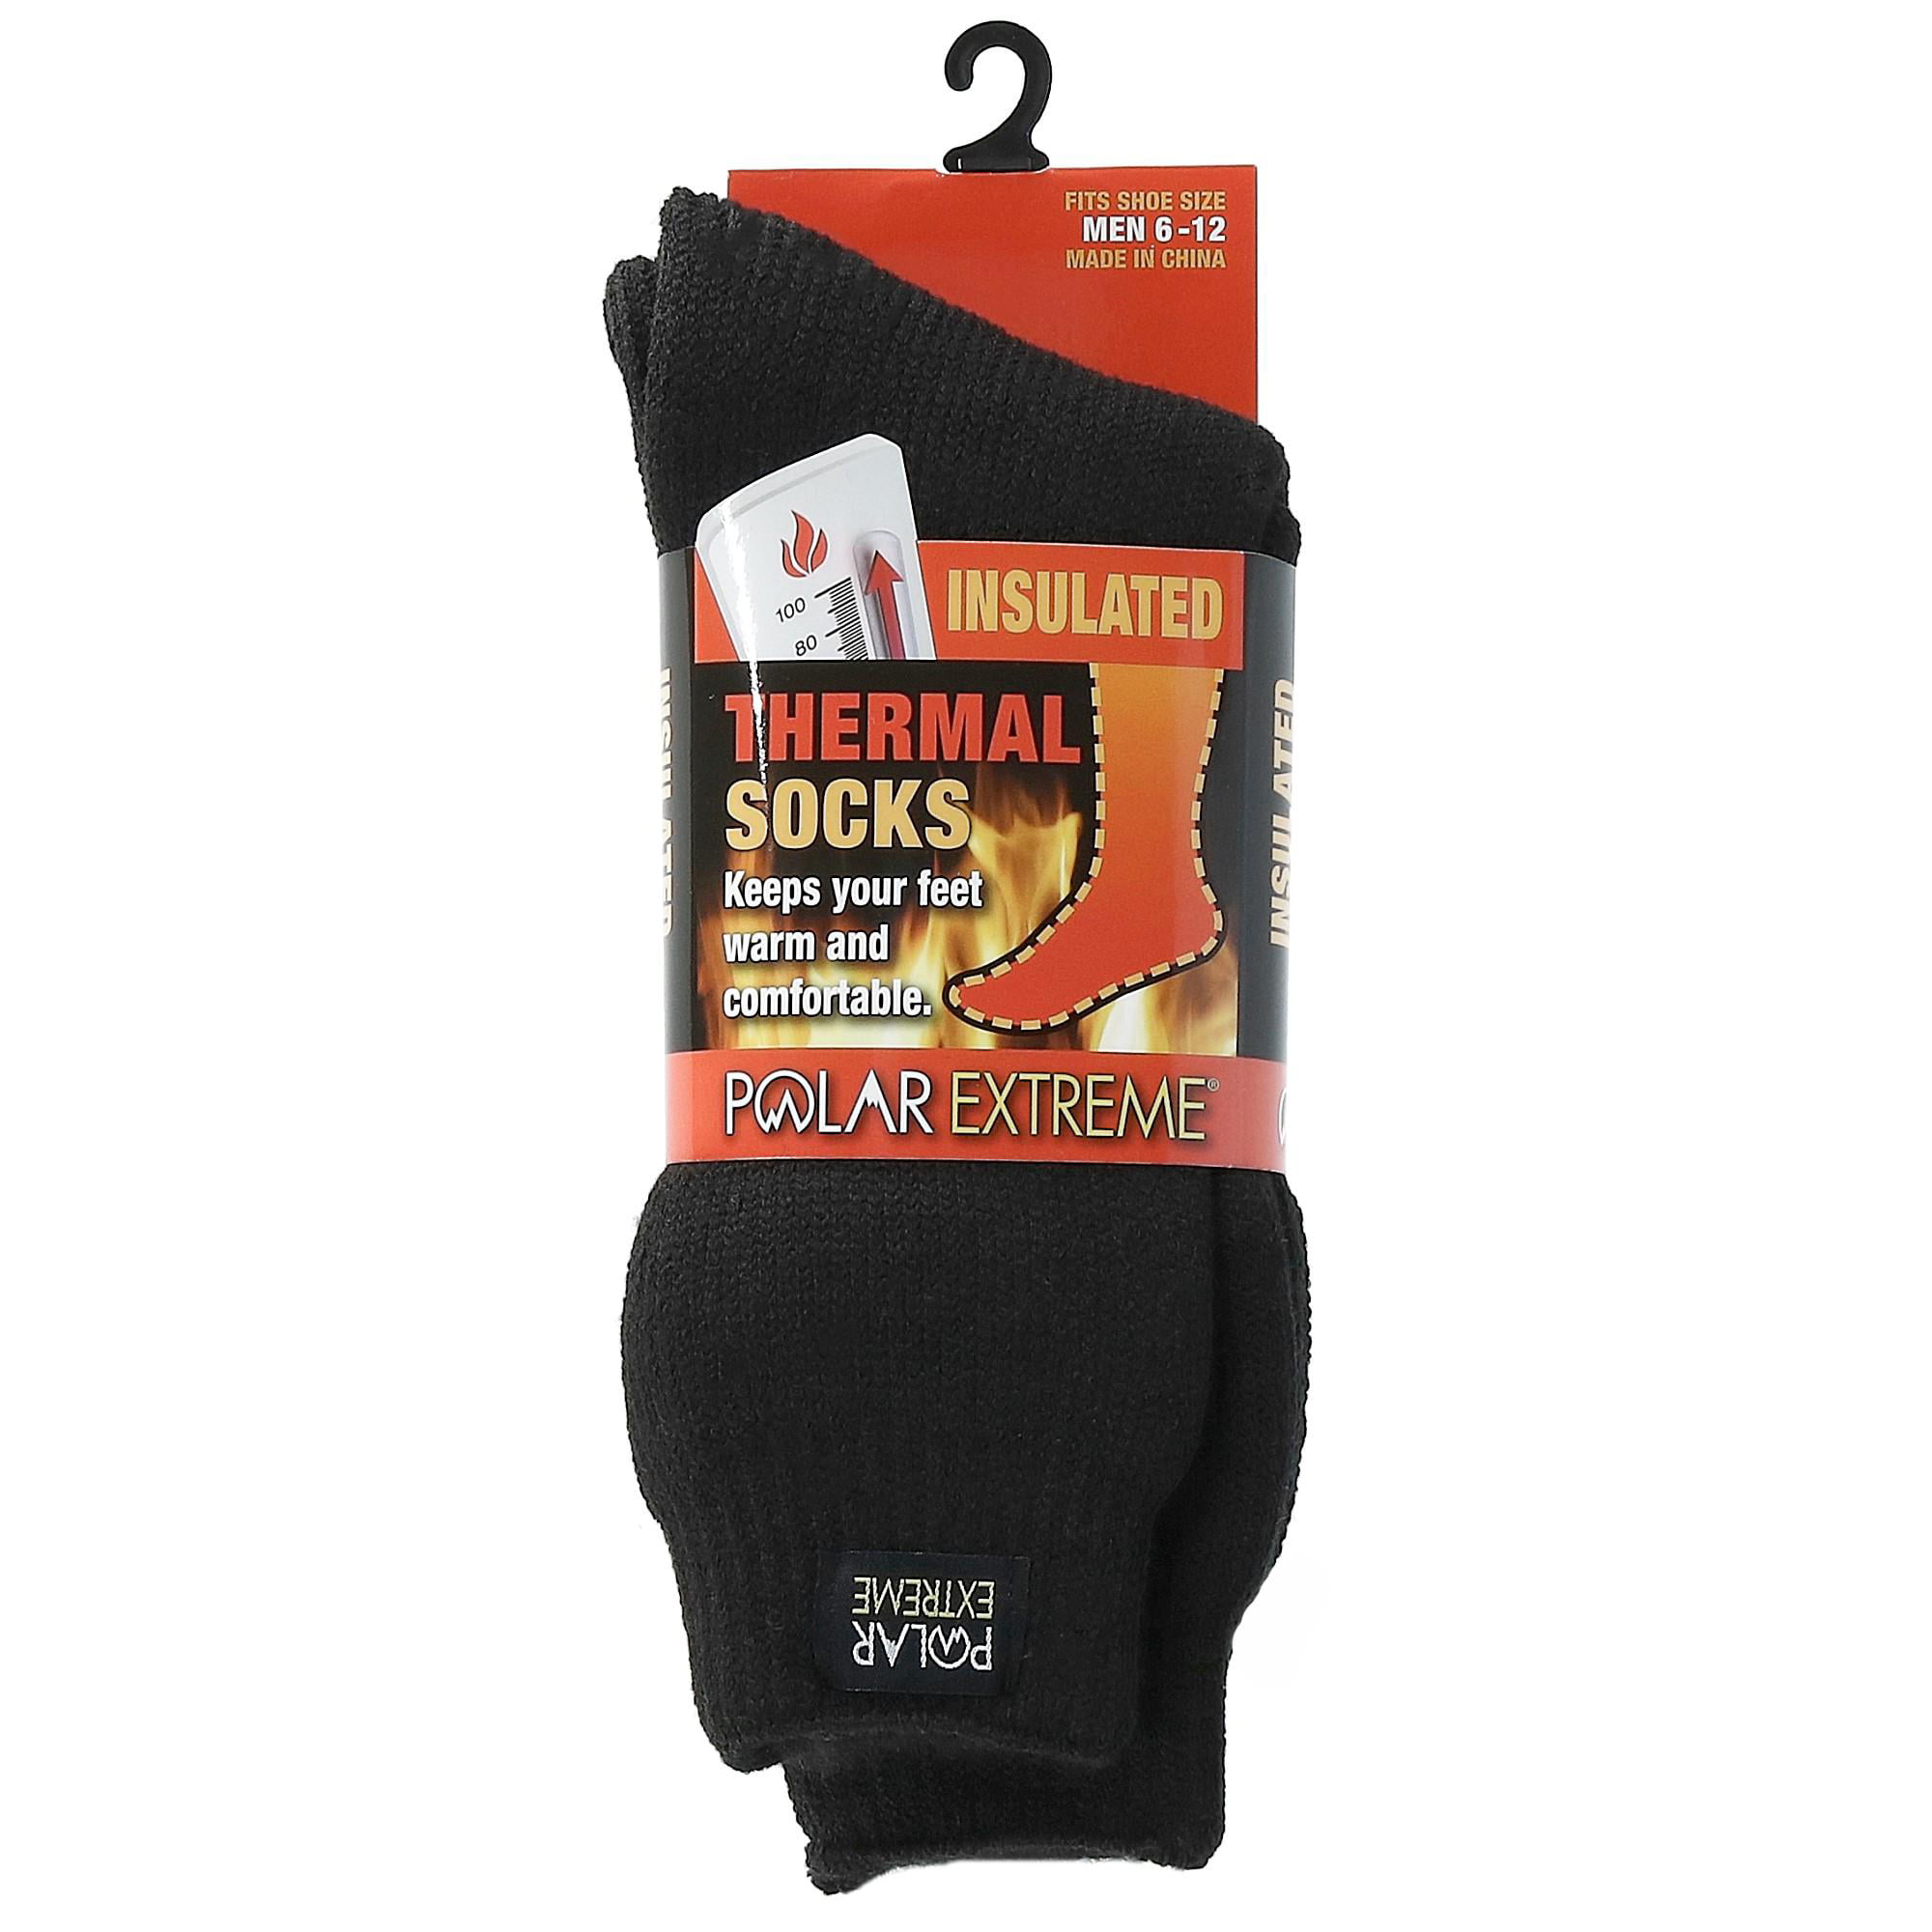 Polar Extreme Men's Insulated Thermal Socks with Fleece Lining ...